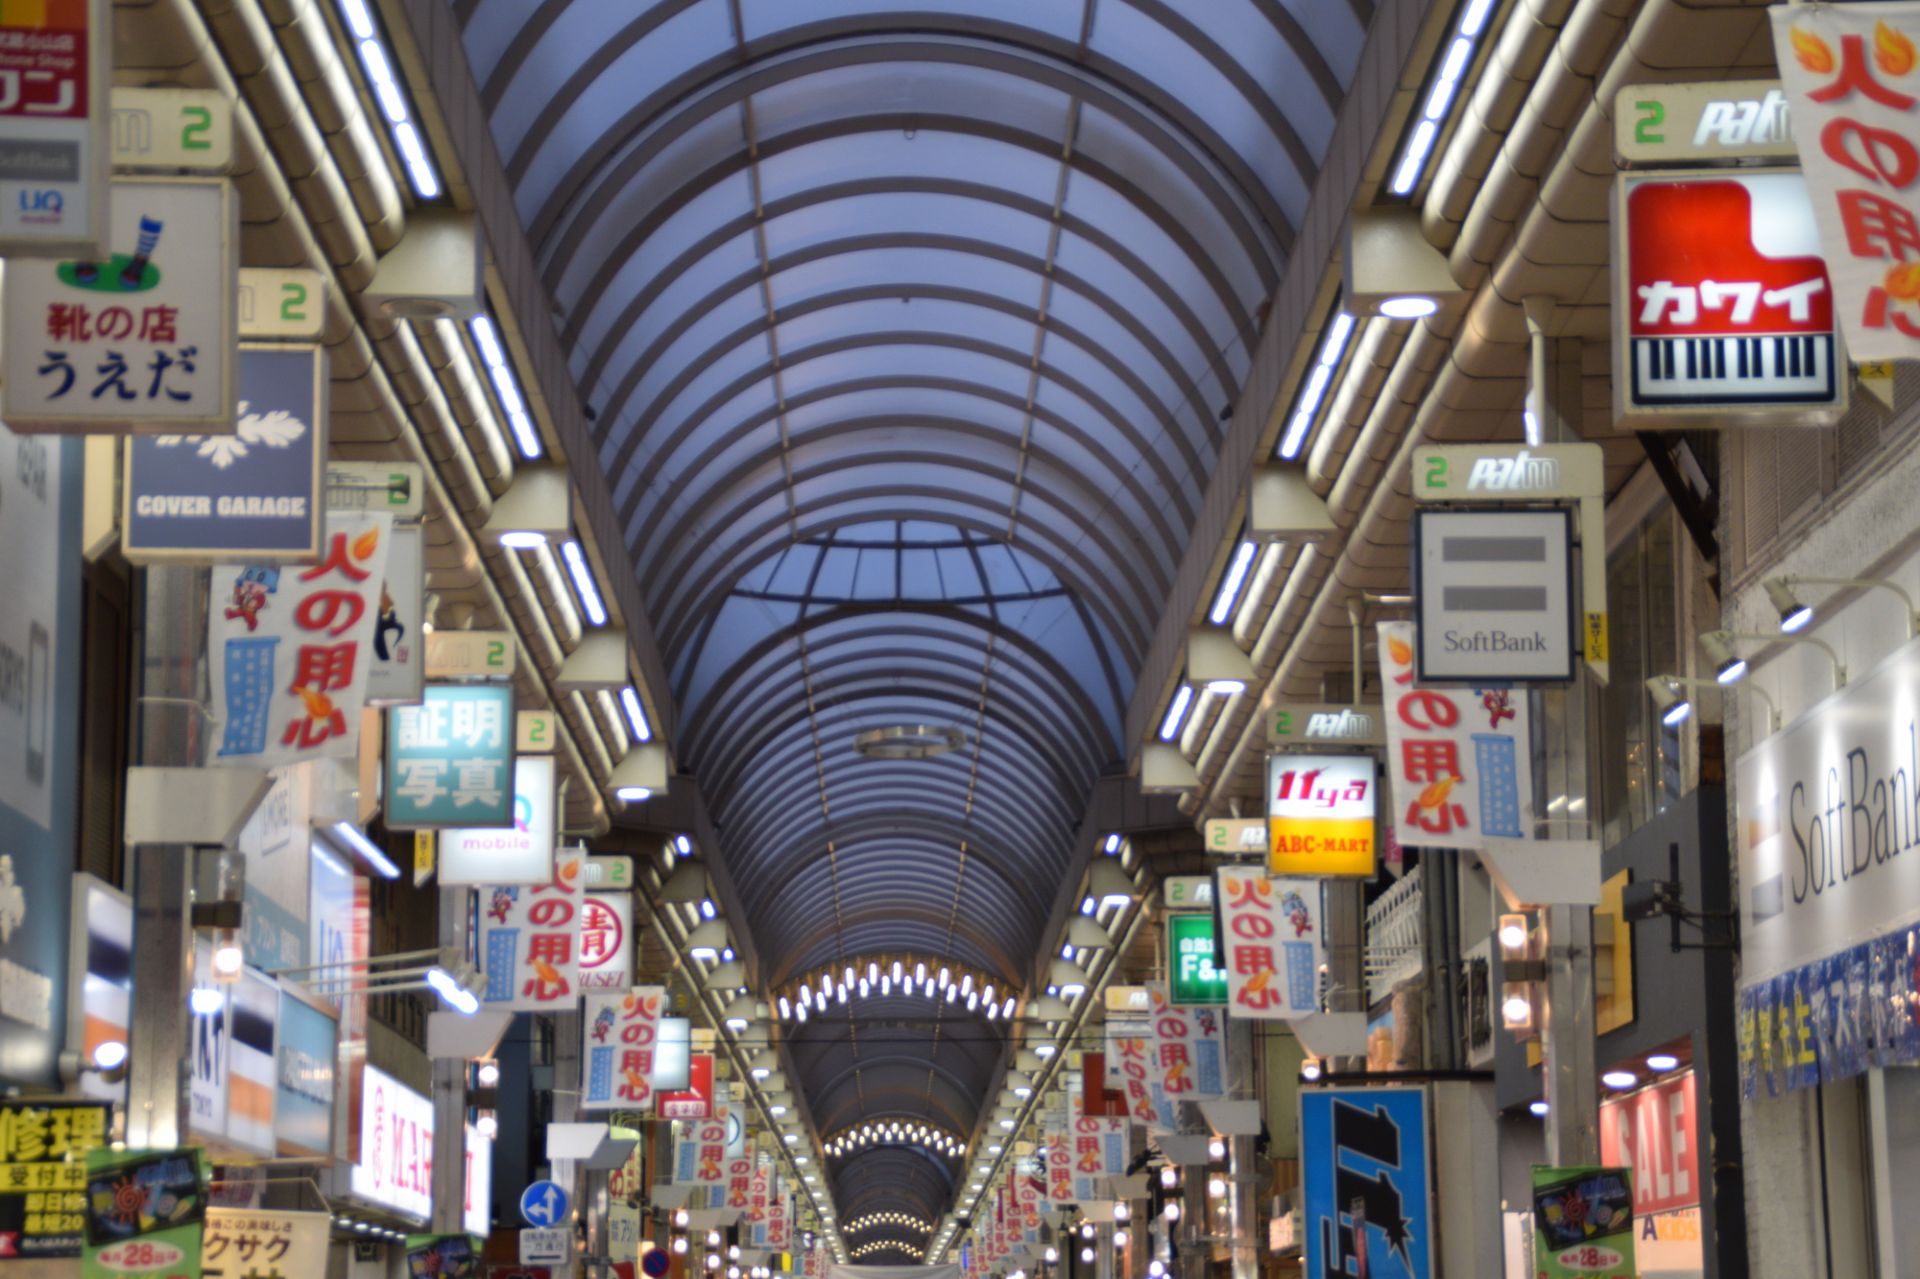 Musashi Koyama Shopping Street Palm Must See Trip Plans Access Hours Price Good Luck Trip